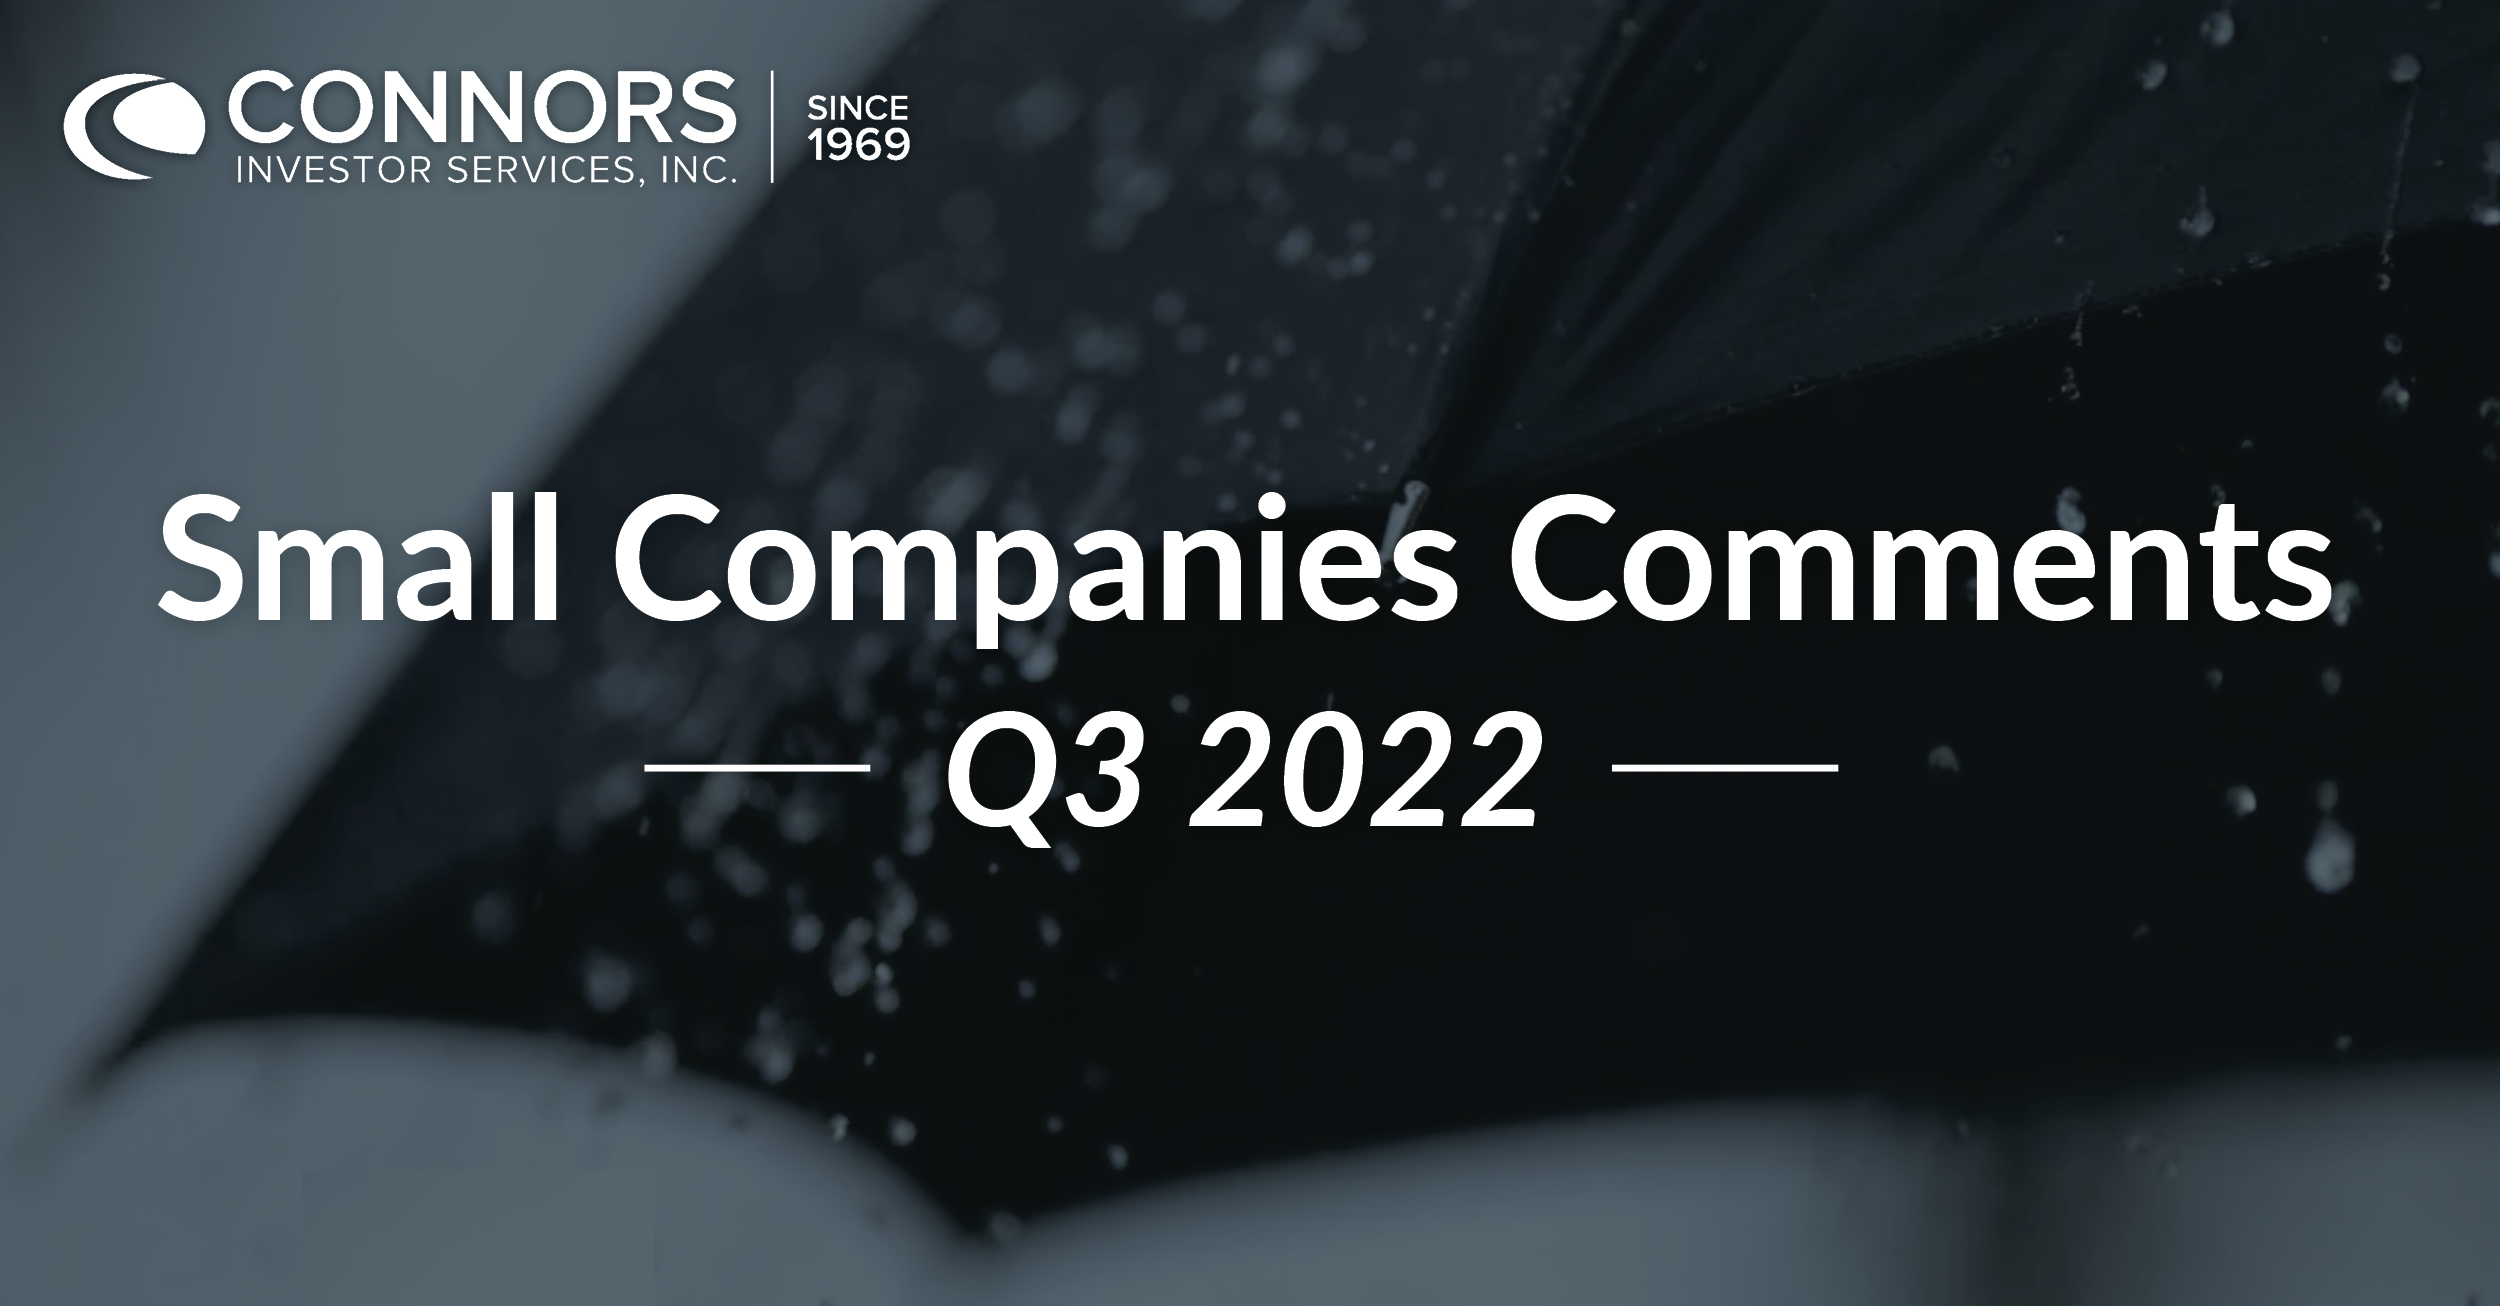 Q3 2022 Small Companies Comments